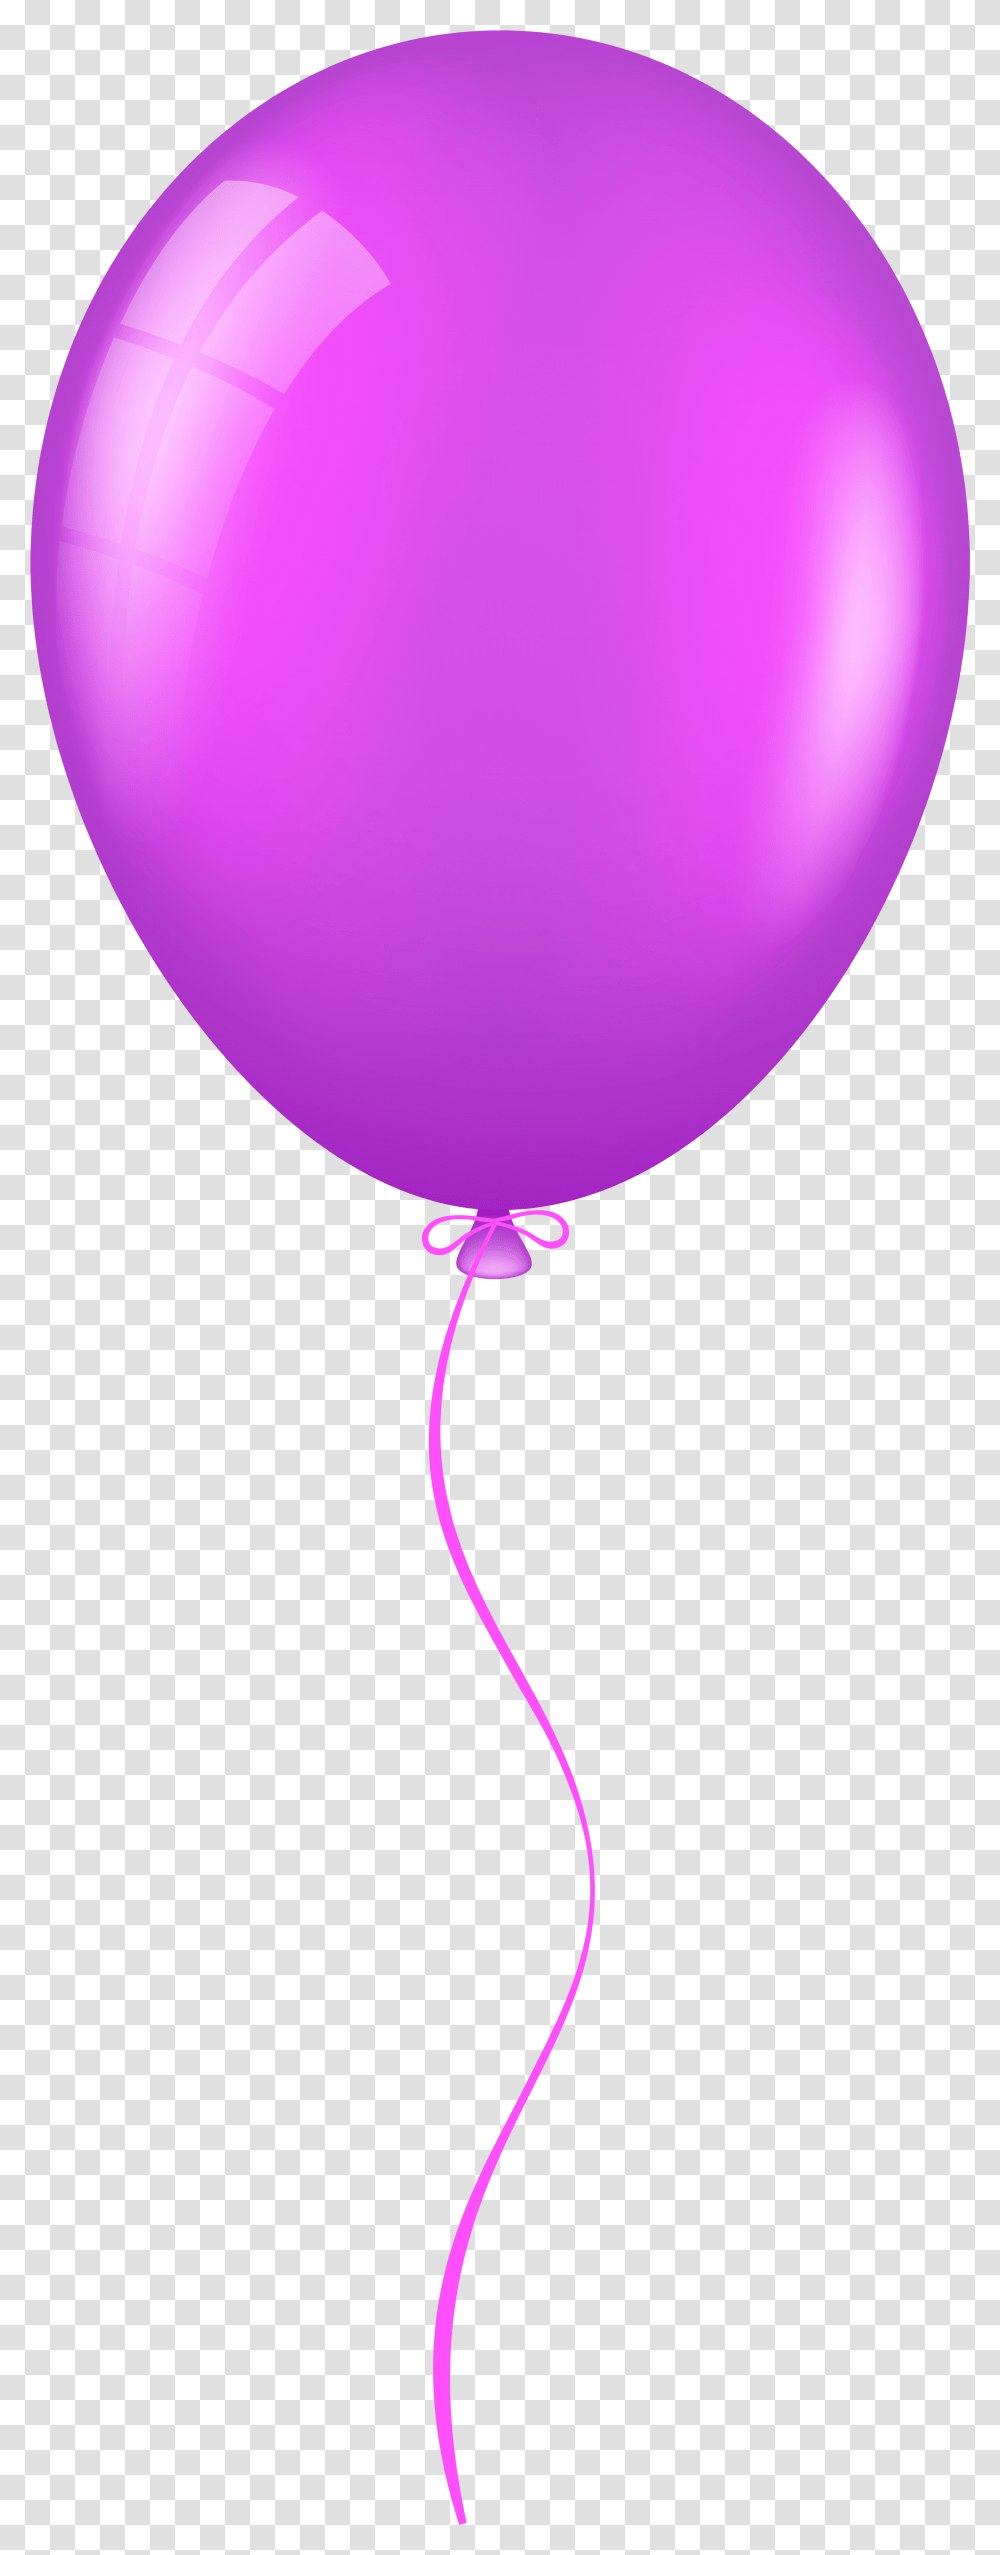 Download Sweet Birthday Free Balloon Clear Background Birthday Balloon Clipart, Purple Transparent Png